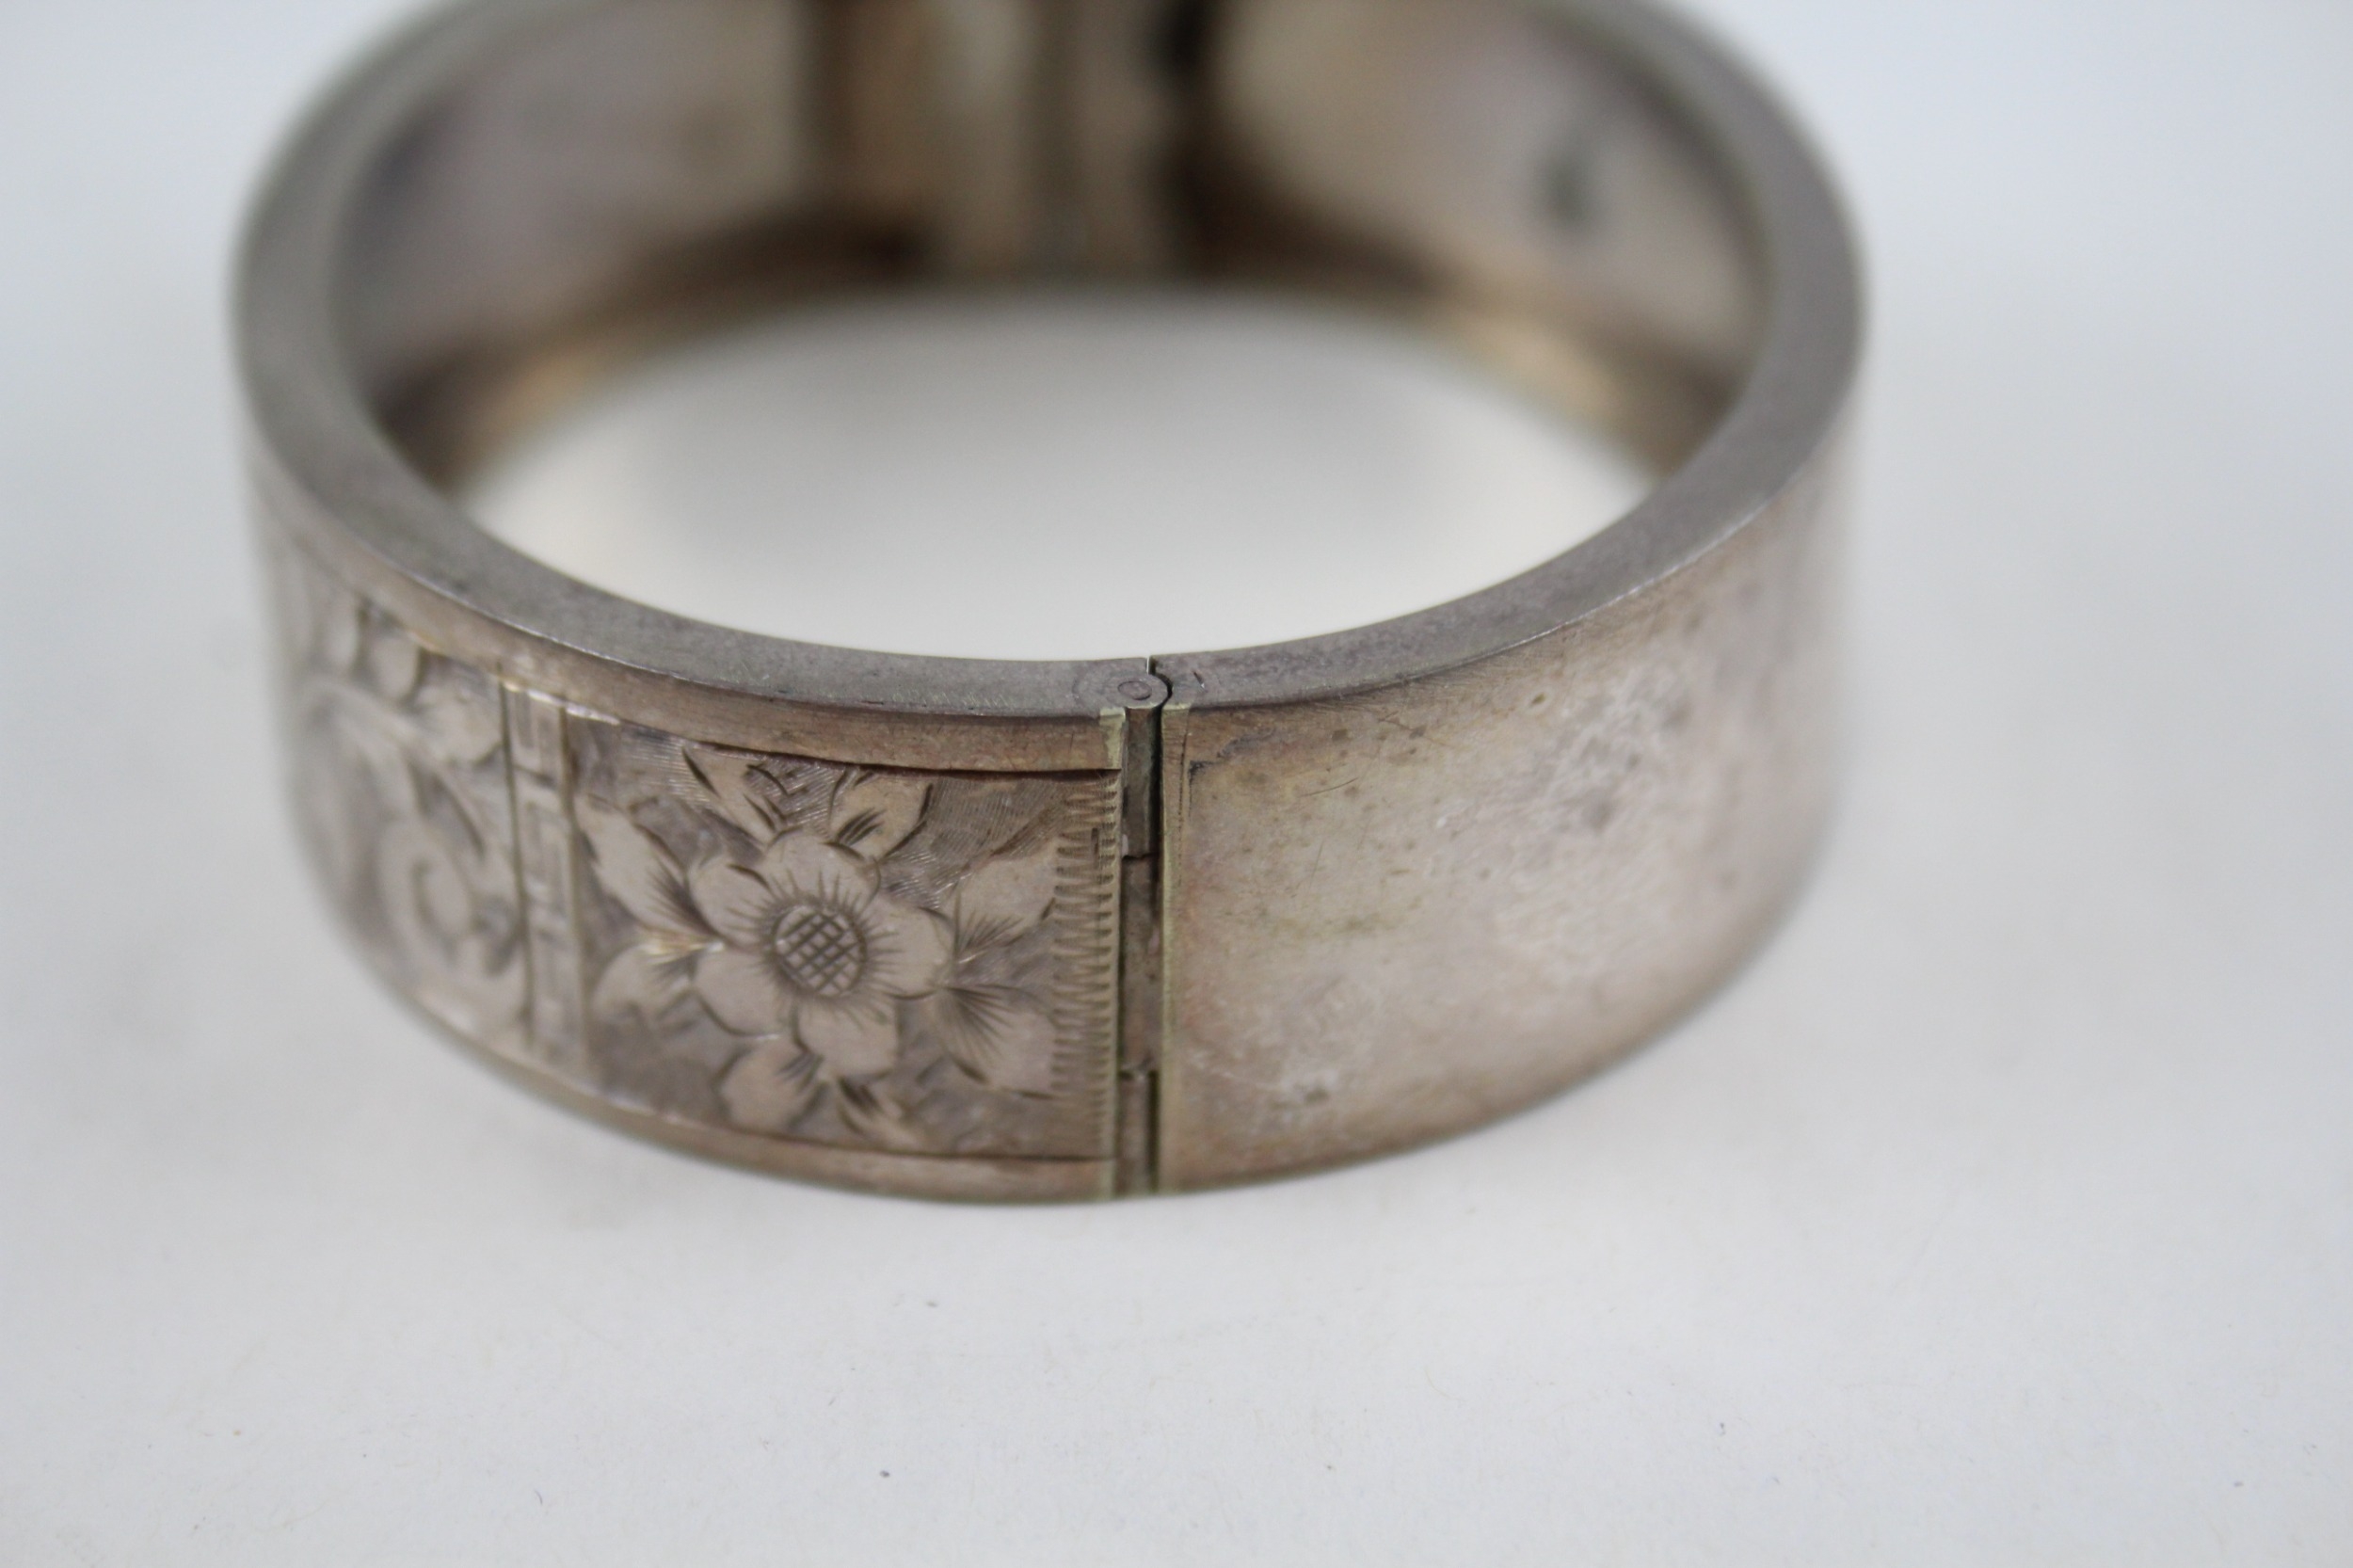 Silver antique bangle with etched design (24g) - Image 3 of 4